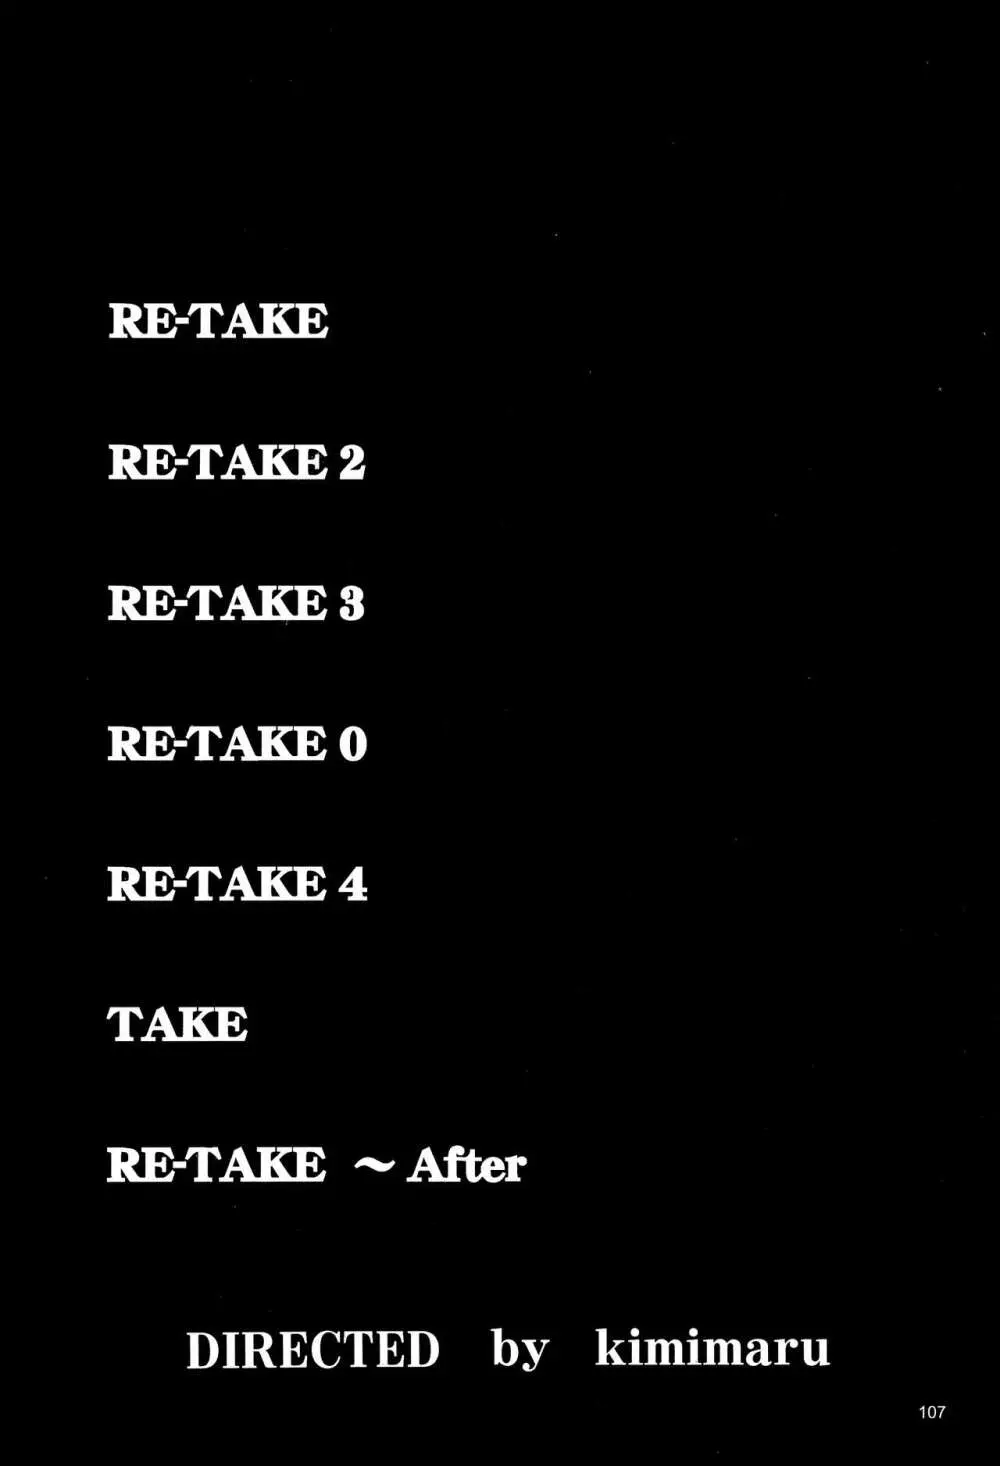 RE-TAKE ～After～ 106ページ